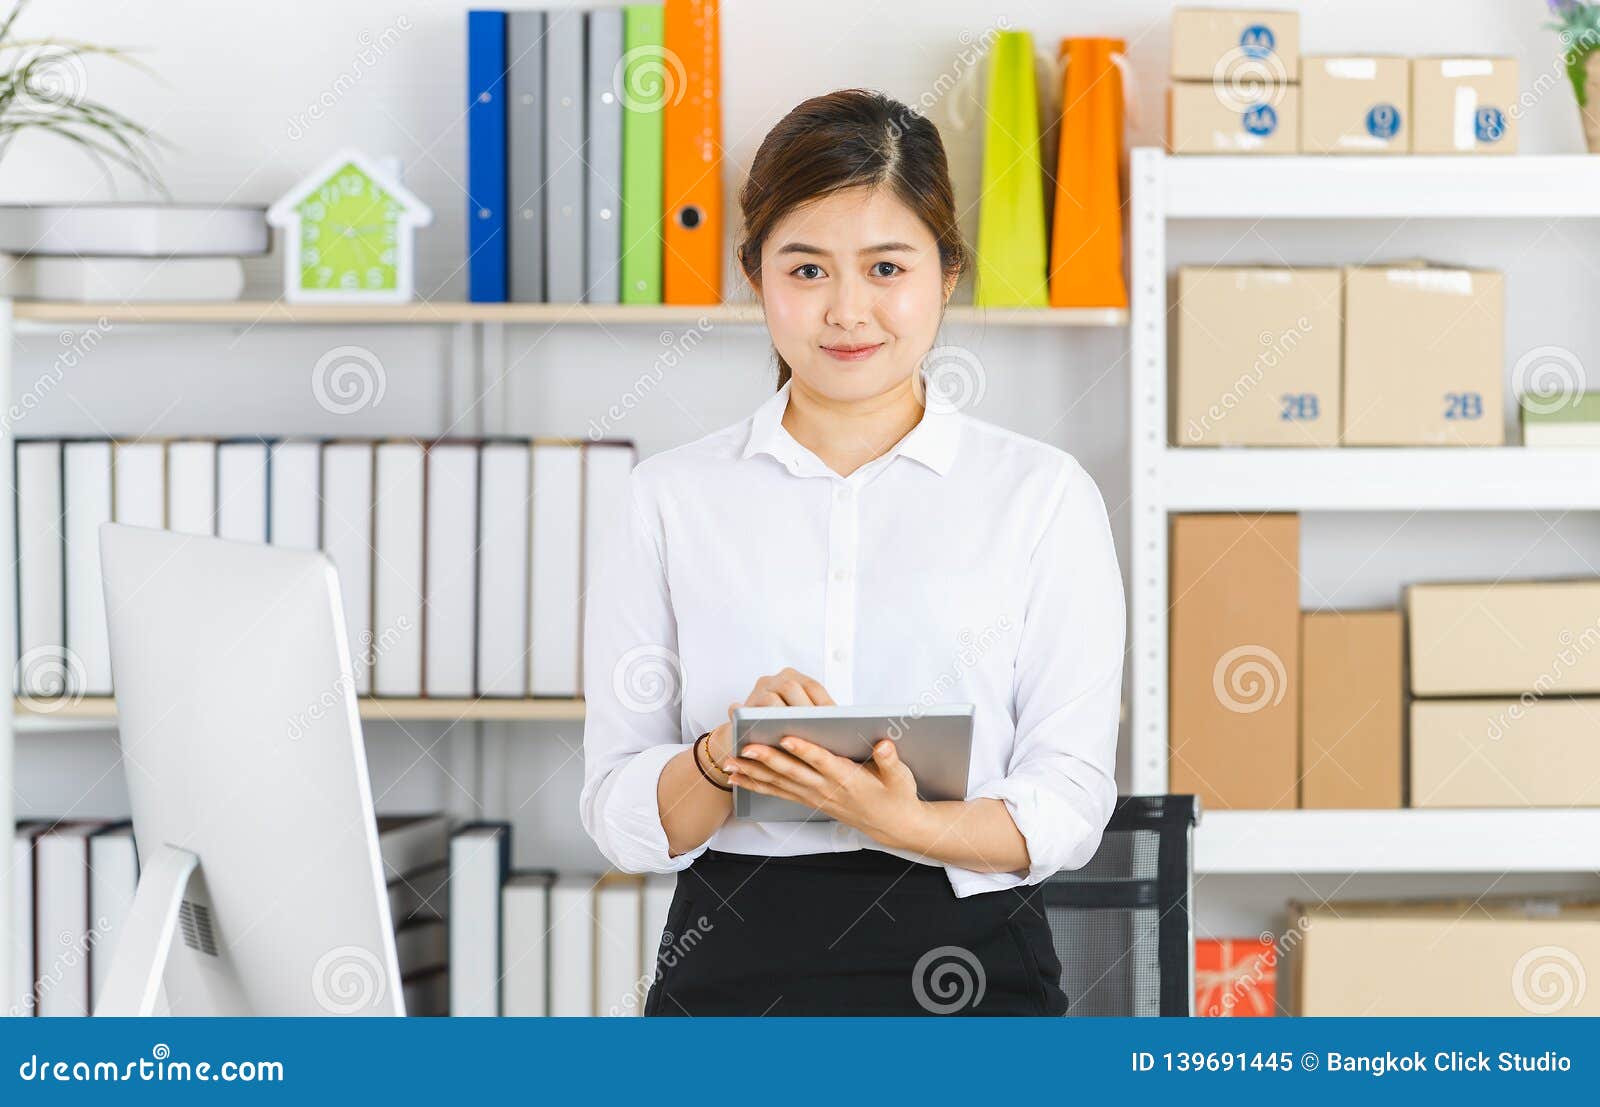 Business Woman Working in Startup Office Stock Image - Image of ...